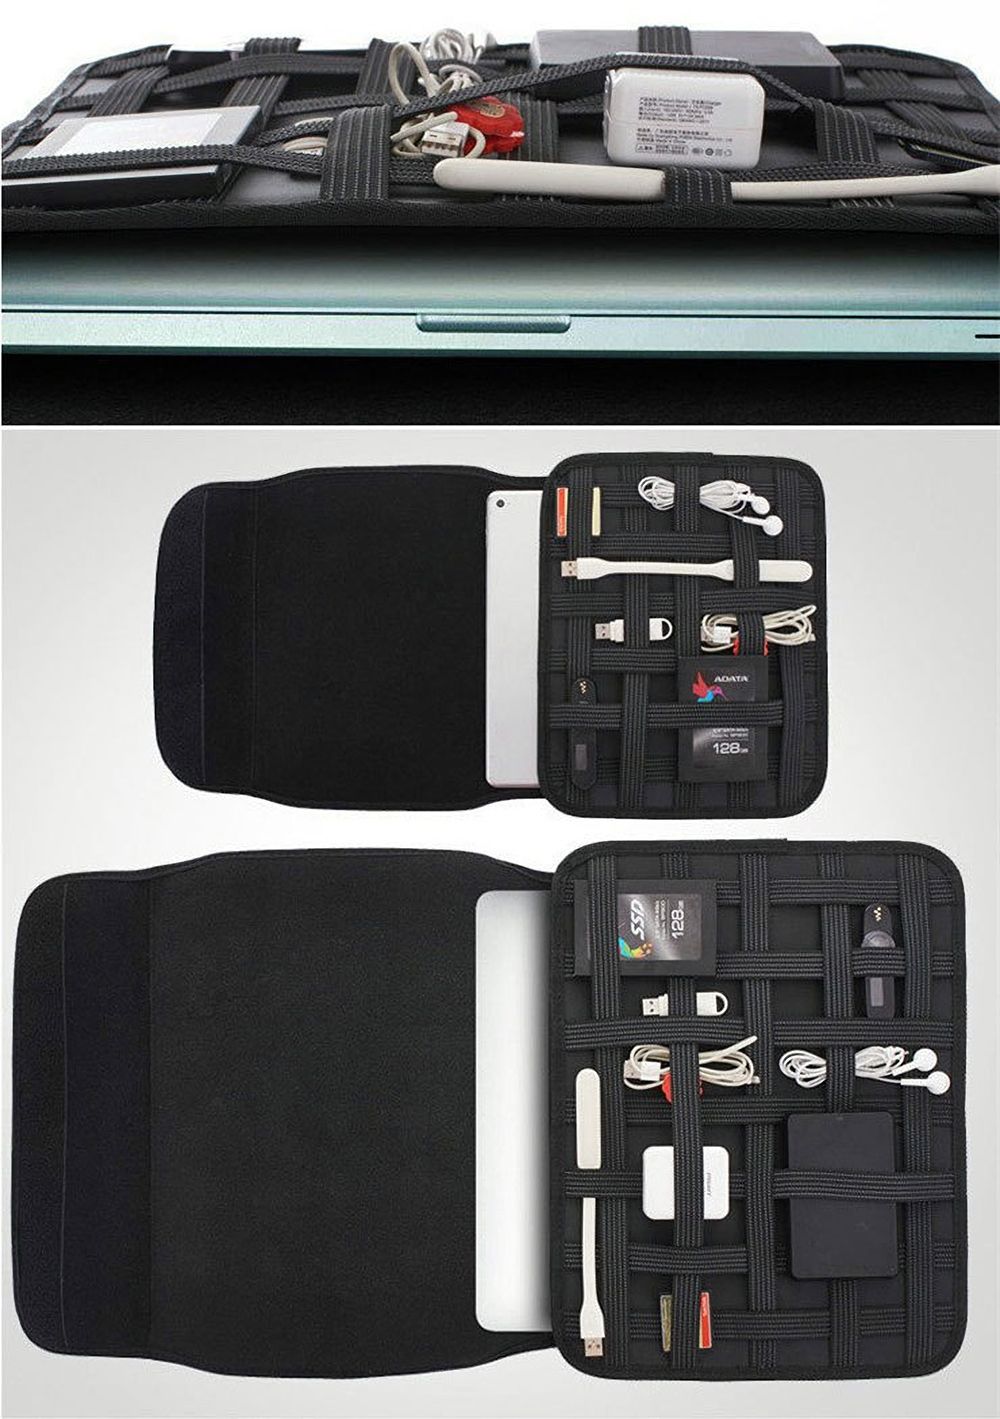 Tablet-Storage-Bag-Sleeve-with-Organizer-Protective-Pouch-Bag-1013-Inch-Travel-Laptop-Tablet-Case-fo-1540582